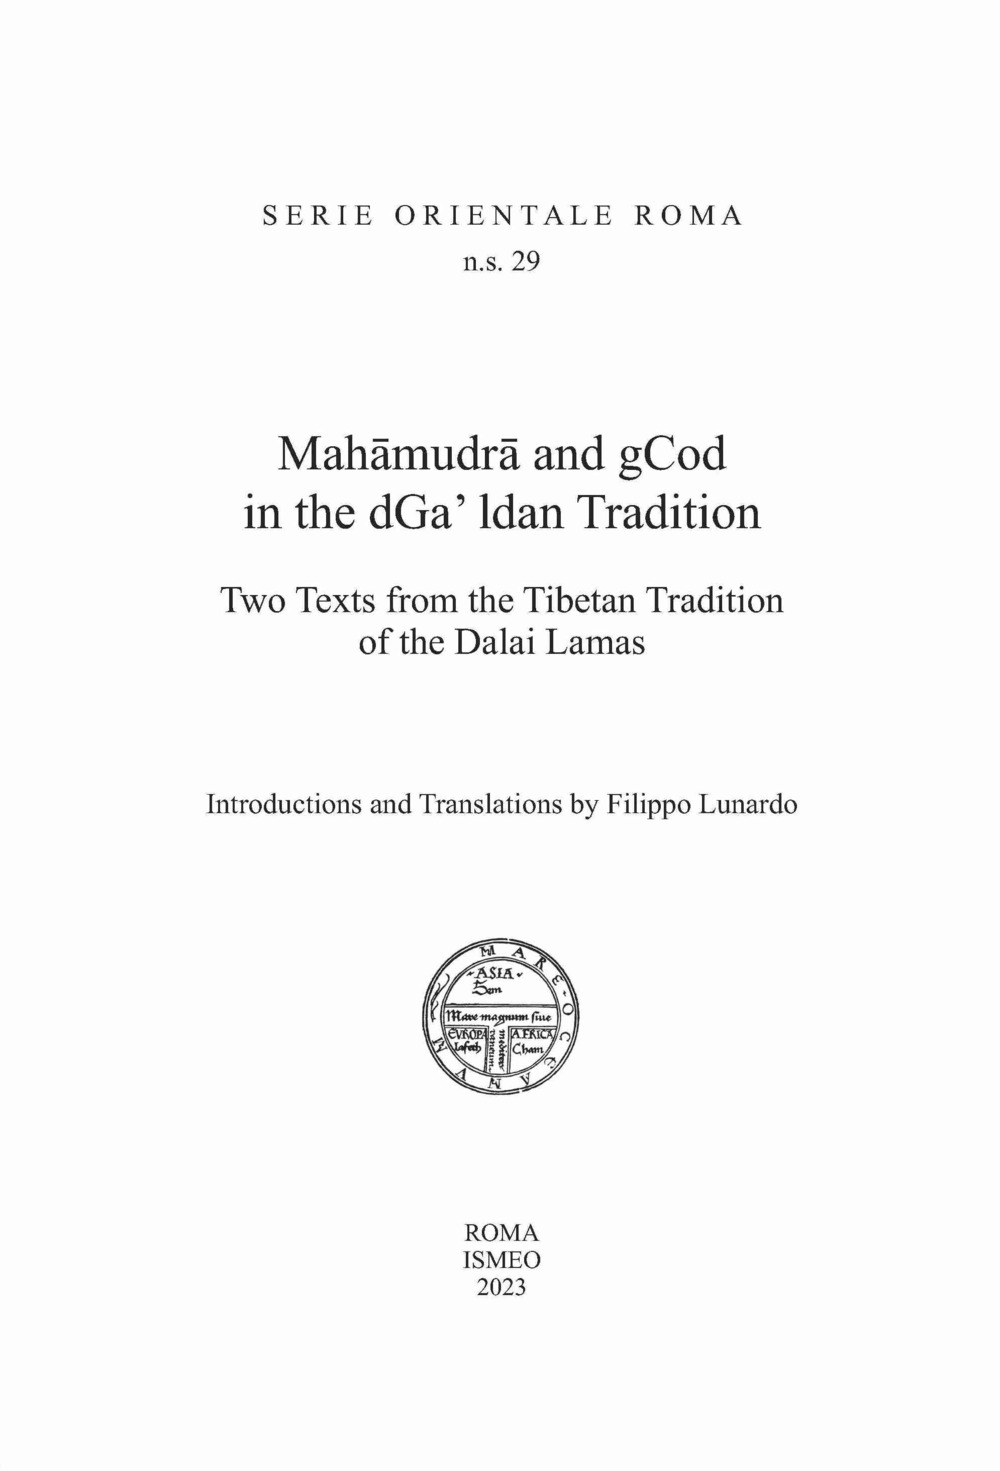 Mahamudra and gCod in the dGa' ldan tradition. Two texts from the Tibetan Tradition of the Dalai Lamas